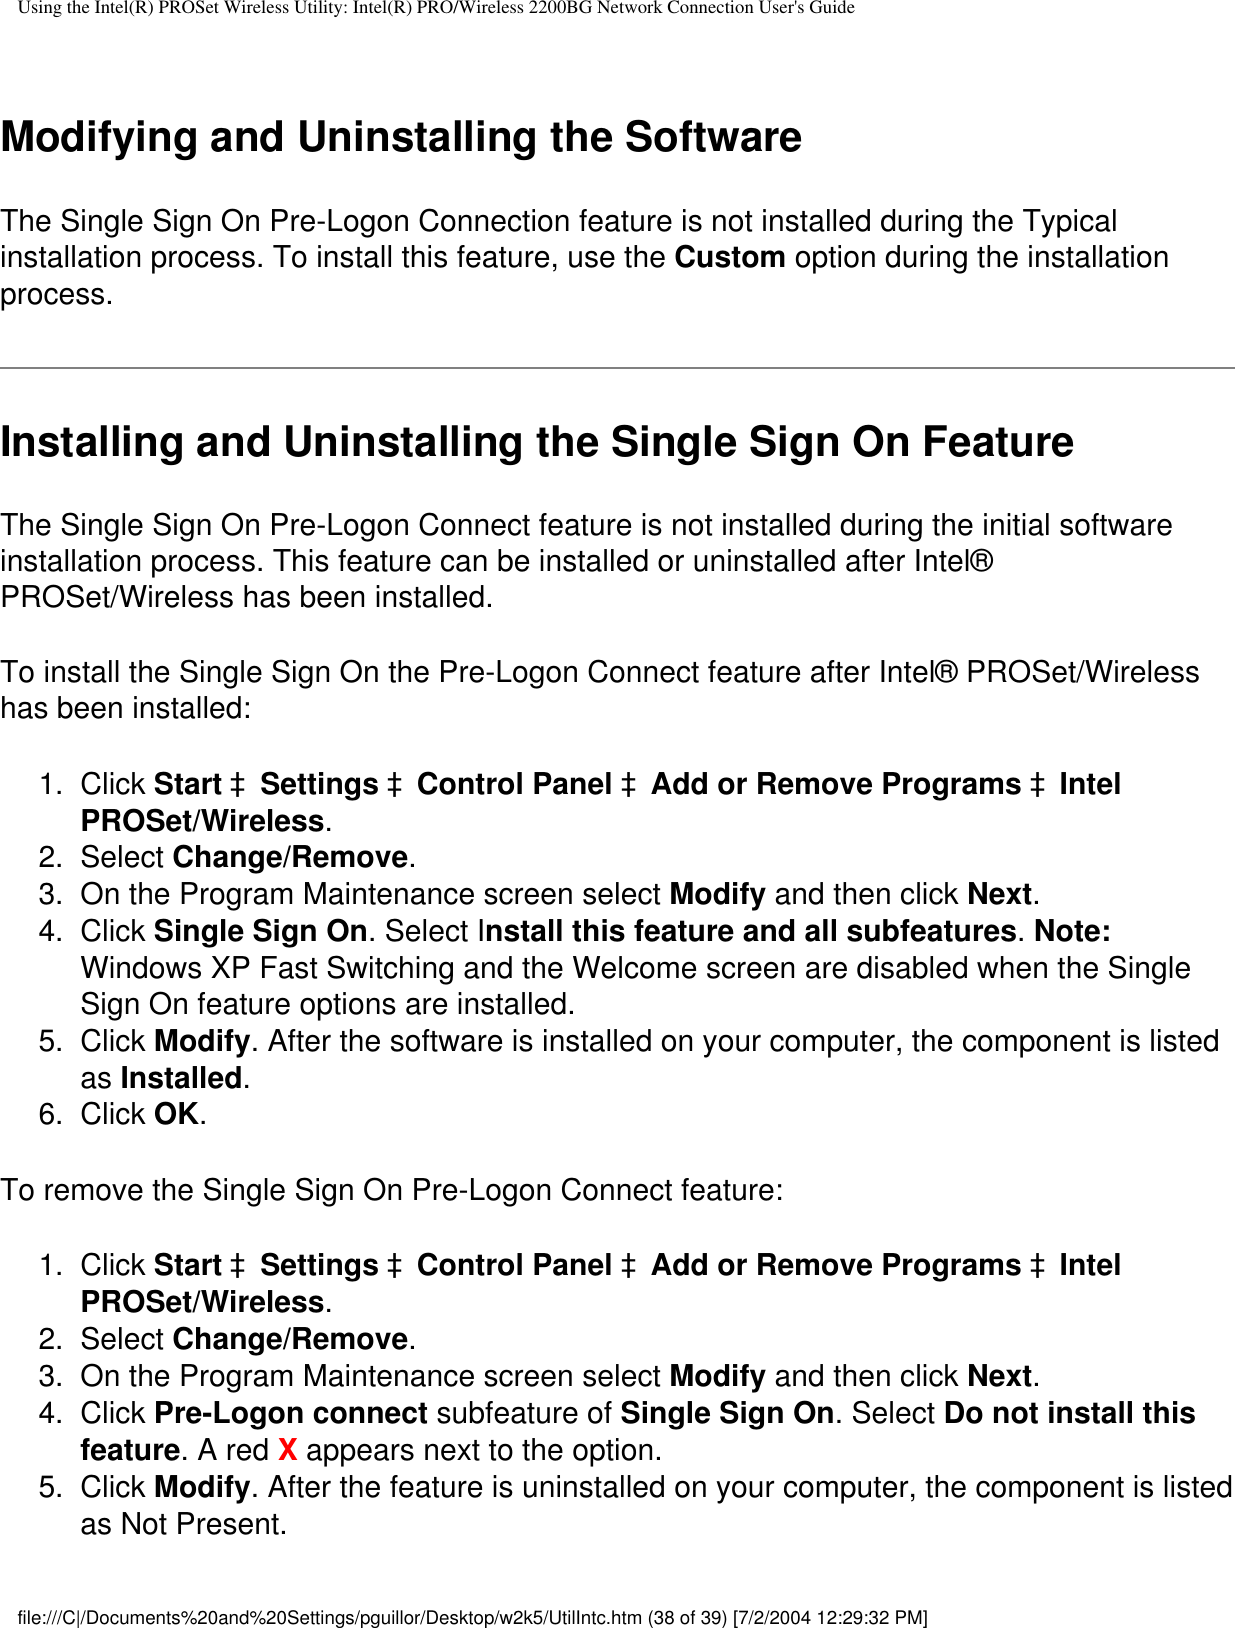 Using the Intel(R) PROSet Wireless Utility: Intel(R) PRO/Wireless 2200BG Network Connection User&apos;s Guide Modifying and Uninstalling the SoftwareThe Single Sign On Pre-Logon Connection feature is not installed during the Typical installation process. To install this feature, use the Custom option during the installation process.Installing and Uninstalling the Single Sign On FeatureThe Single Sign On Pre-Logon Connect feature is not installed during the initial software installation process. This feature can be installed or uninstalled after Intel®  PROSet/Wireless has been installed.To install the Single Sign On the Pre-Logon Connect feature after Intel® PROSet/Wireless has been installed:1.  Click Start àSettings àControl Panel àAdd or Remove Programs àIntel PROSet/Wireless.2.  Select Change/Remove.3.  On the Program Maintenance screen select Modify and then click Next.4.  Click Single Sign On. Select Install this feature and all subfeatures. Note: Windows XP Fast Switching and the Welcome screen are disabled when the Single Sign On feature options are installed.5.  Click Modify. After the software is installed on your computer, the component is listed as Installed.6.  Click OK.To remove the Single Sign On Pre-Logon Connect feature:1.  Click Start àSettings àControl Panel àAdd or Remove Programs àIntel PROSet/Wireless.2.  Select Change/Remove.3.  On the Program Maintenance screen select Modify and then click Next.4.  Click Pre-Logon connect subfeature of Single Sign On. Select Do not install this feature. A red X appears next to the option.5.  Click Modify. After the feature is uninstalled on your computer, the component is listed as Not Present.file:///C|/Documents%20and%20Settings/pguillor/Desktop/w2k5/UtilIntc.htm (38 of 39) [7/2/2004 12:29:32 PM]